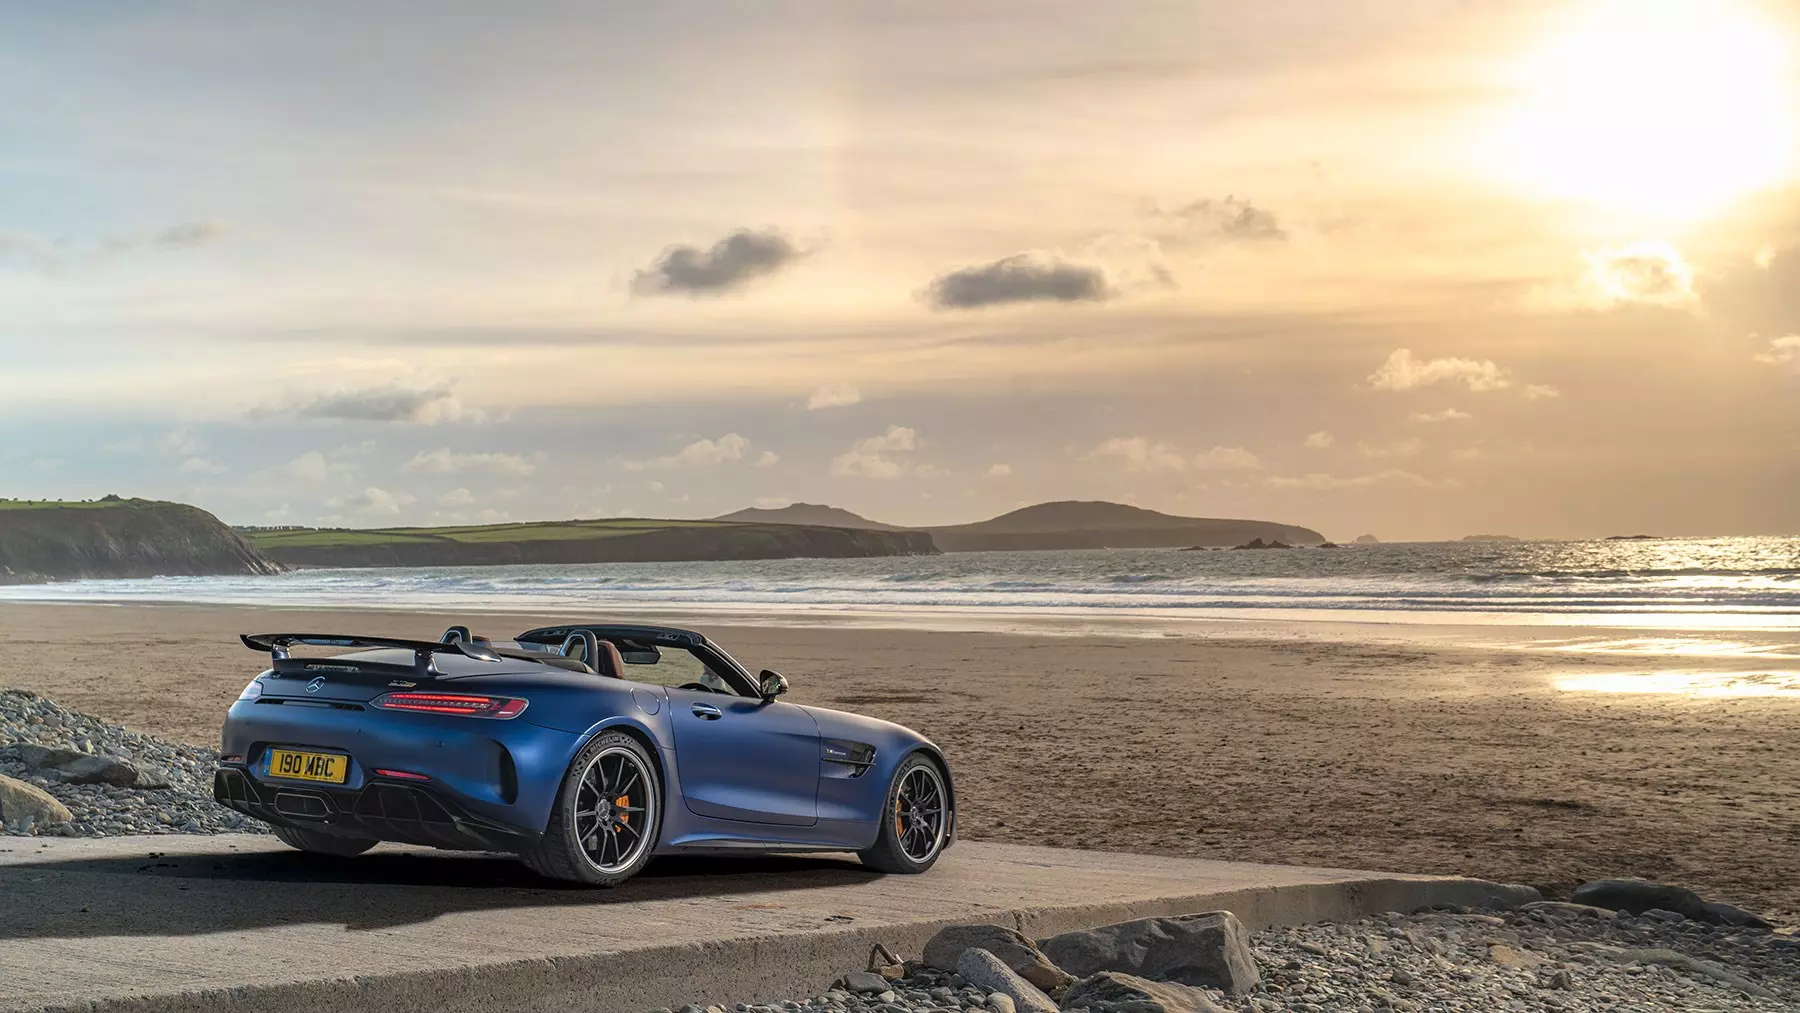 Mercedes-AMG GT R Roadster price is £178,675